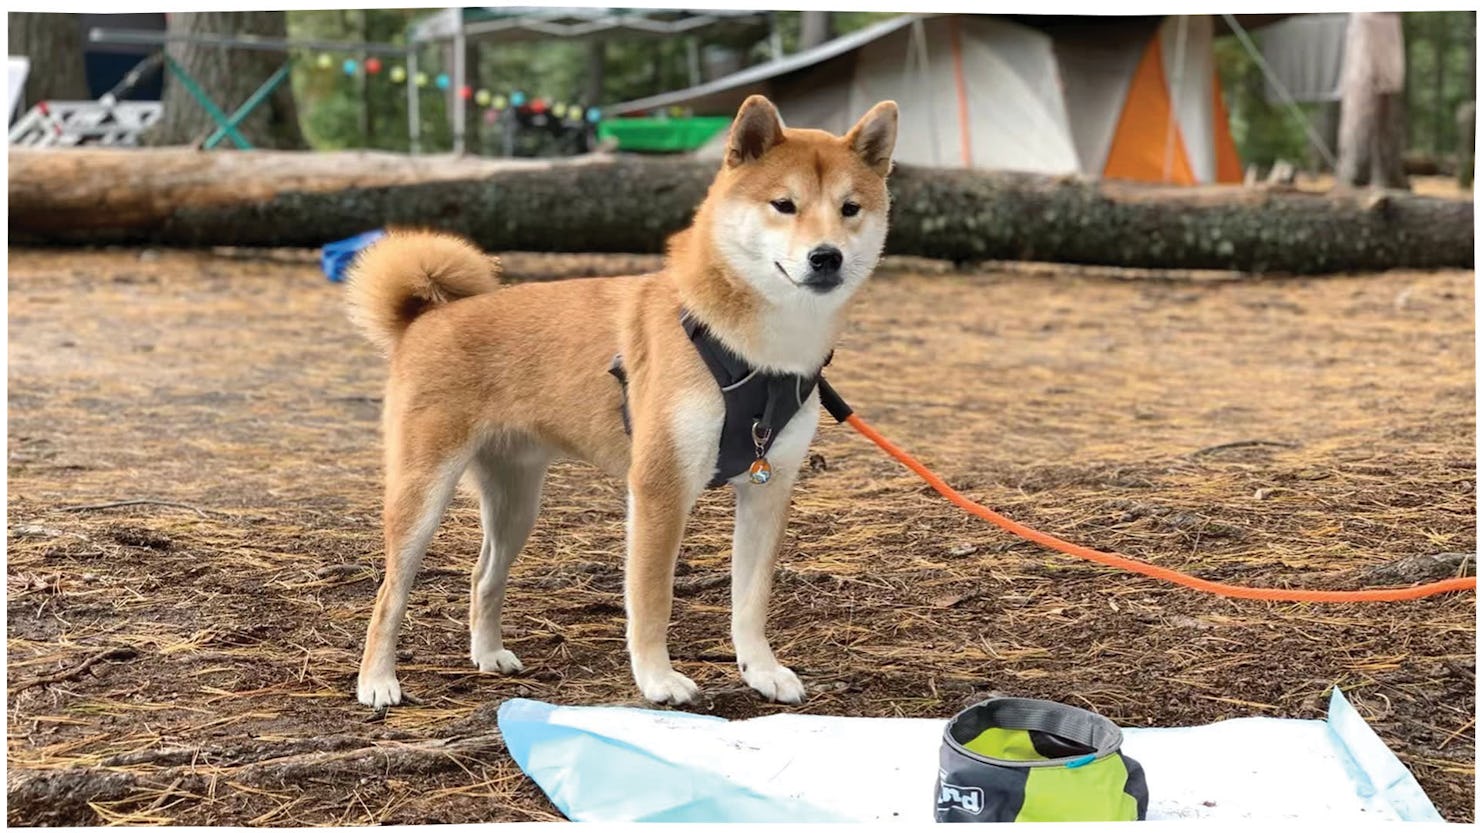 Camping with your furry friend (stock image)